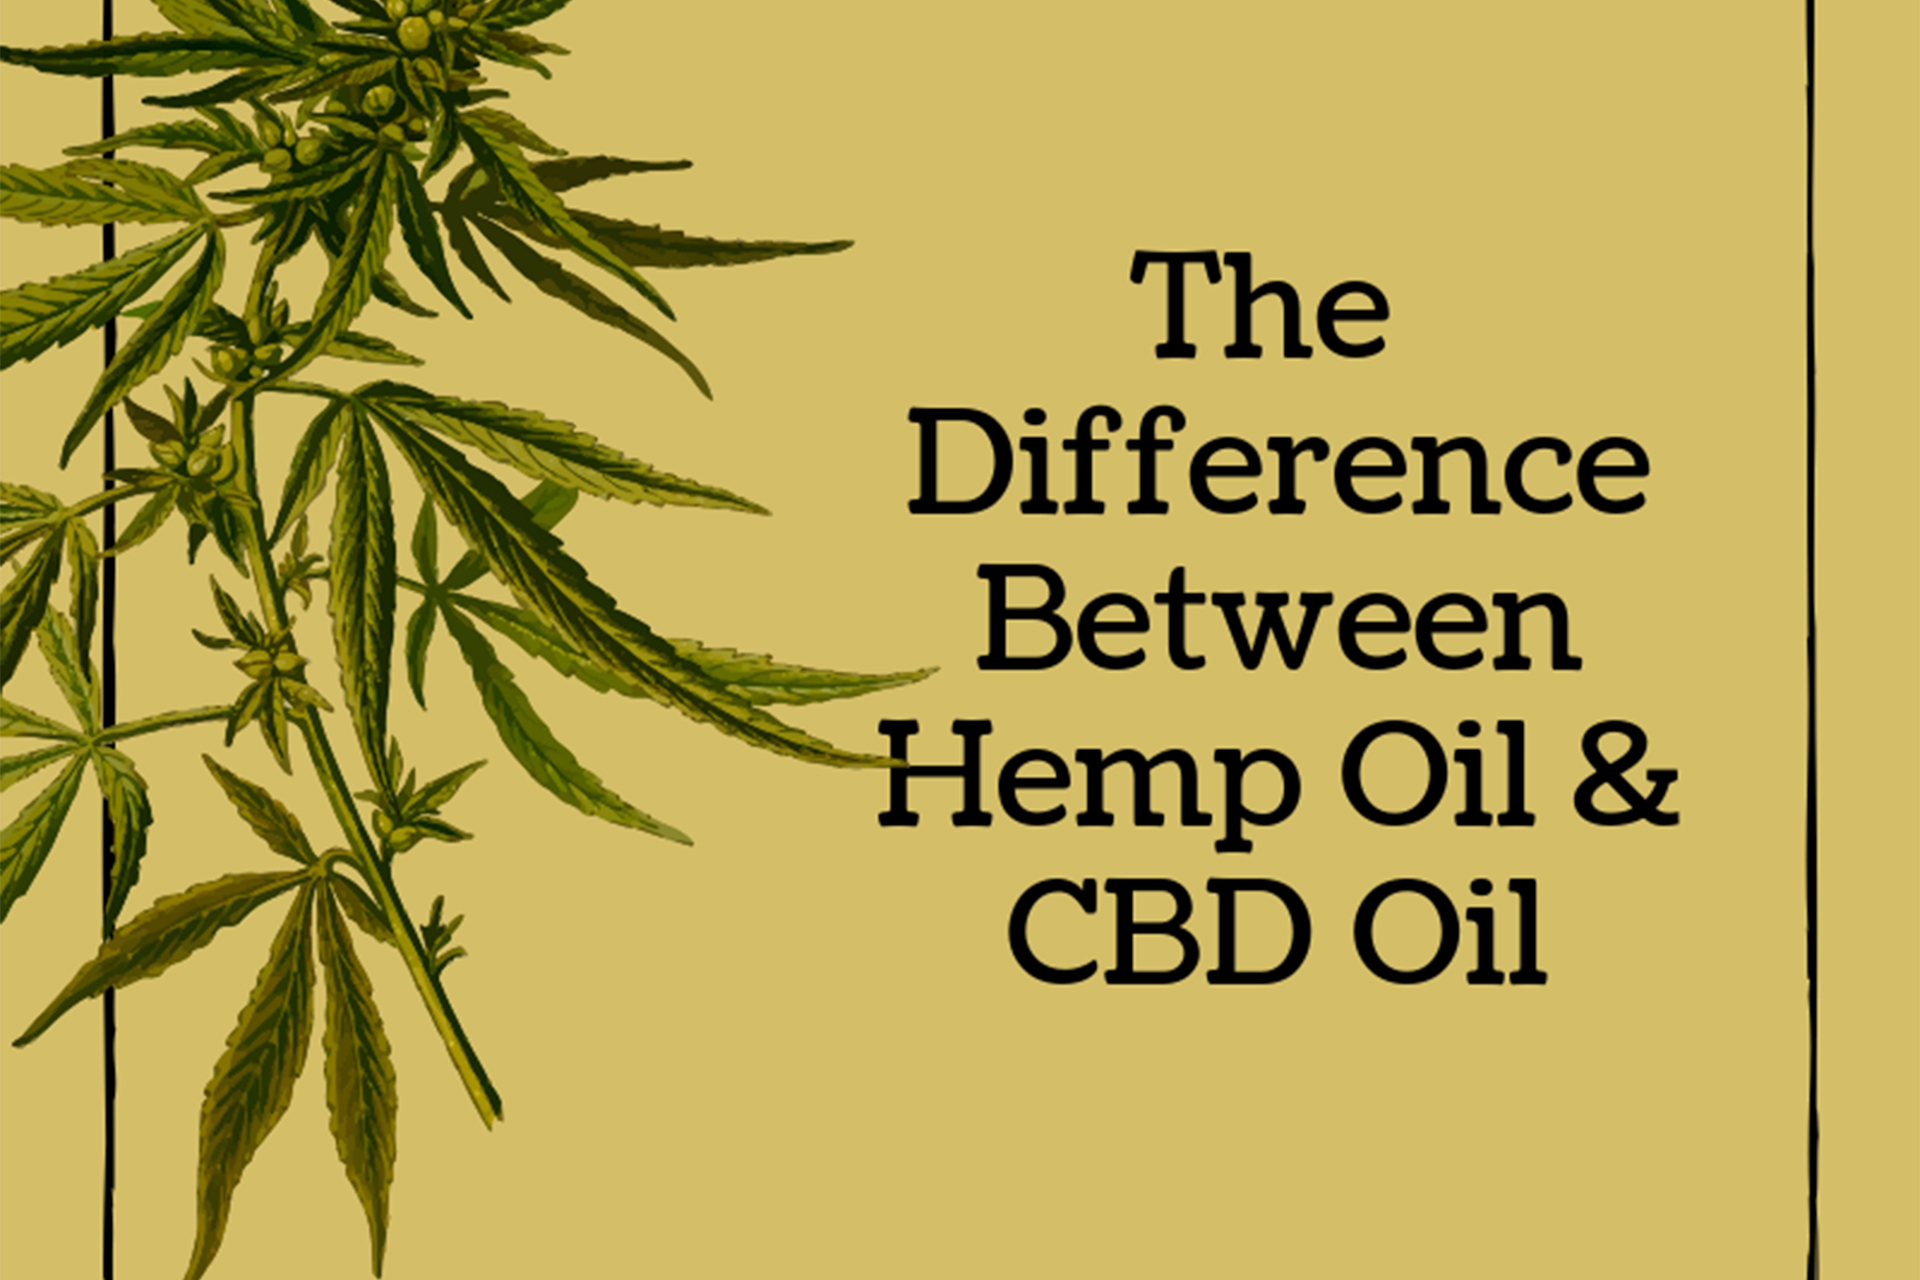 A graphic illustration of Majiruana leaves with text : The Difference Between Hemp Oil & CBD Oil"